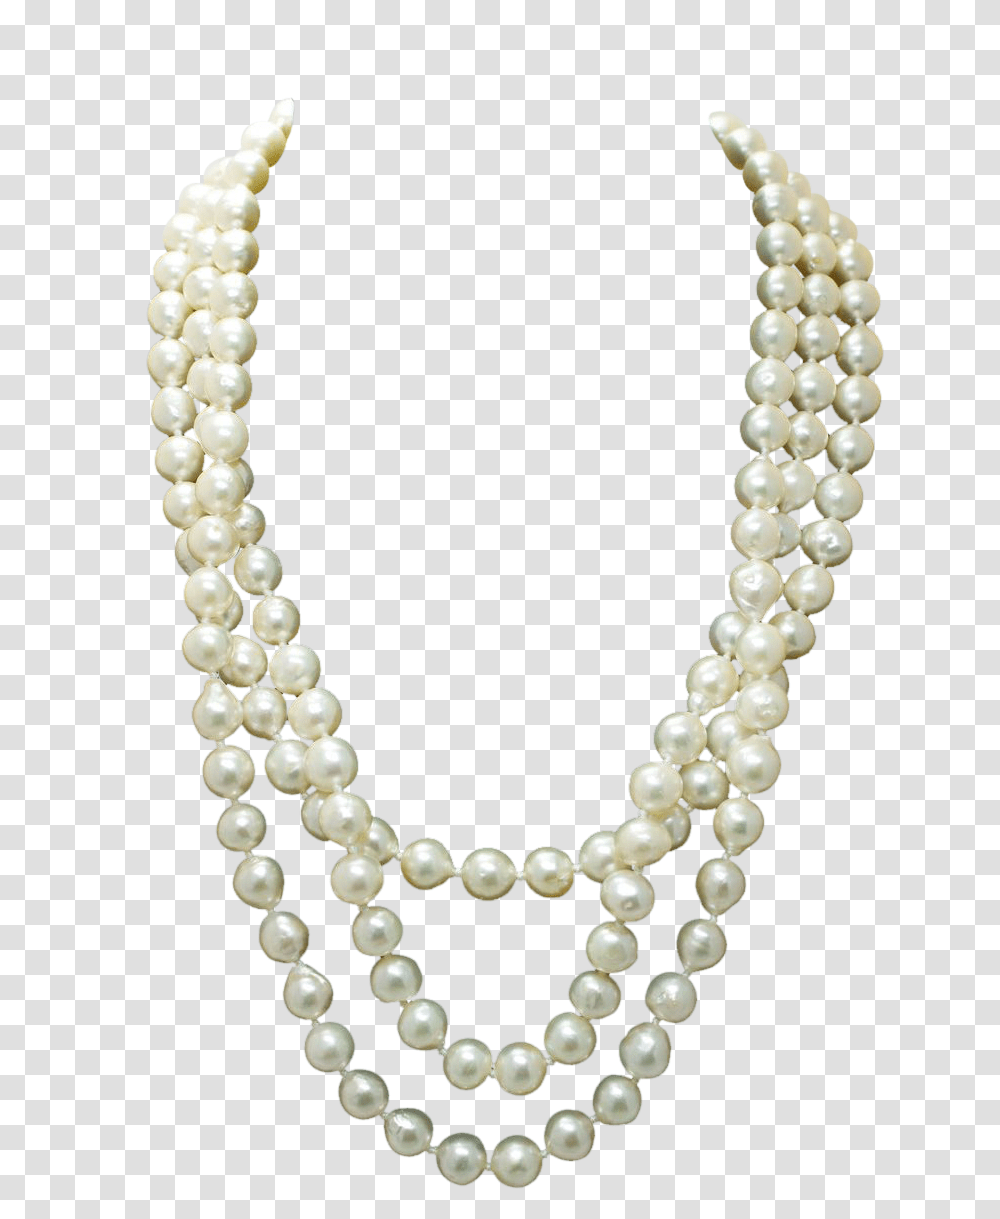 Necklace With Best Pearl Three Layer Necklace, Bead Necklace, Jewelry, Ornament, Accessories Transparent Png